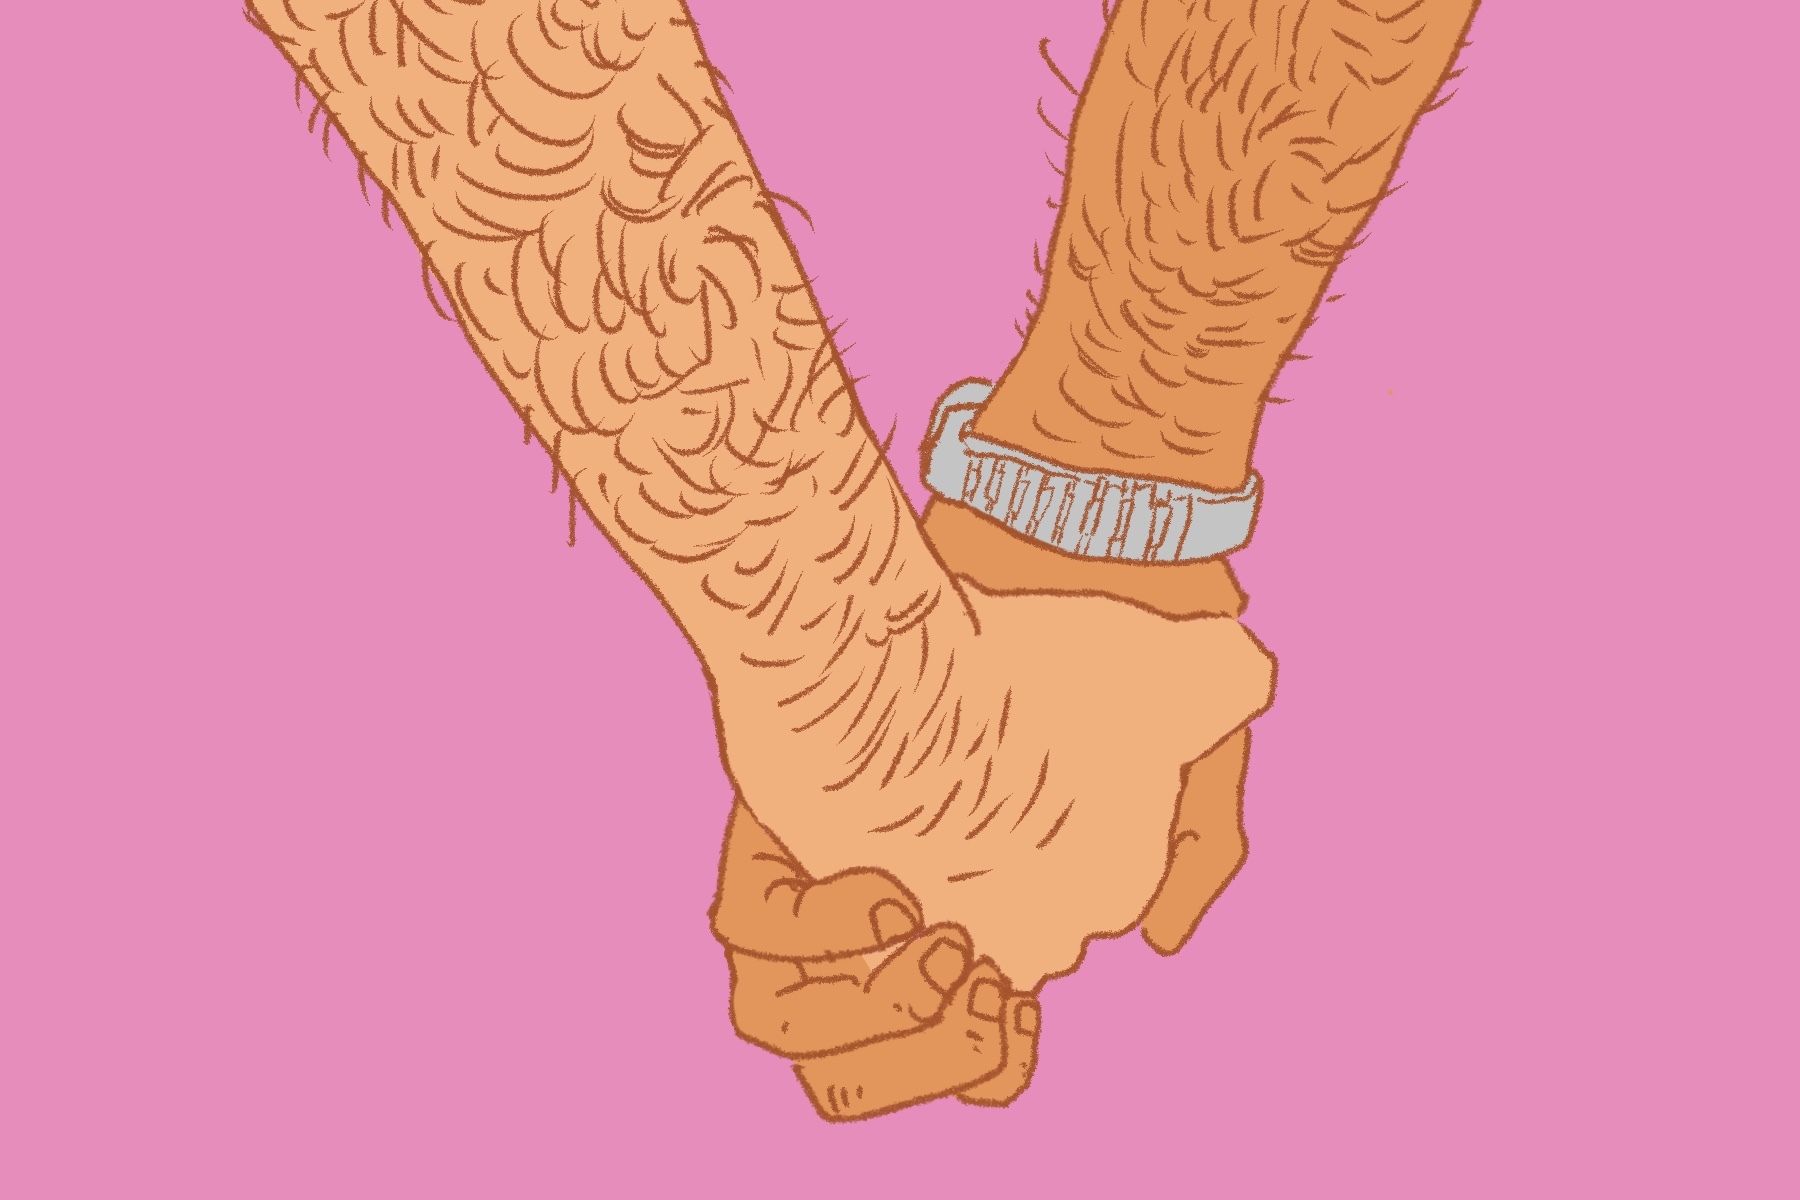 A drawing of 'bros' shows two men holding hands